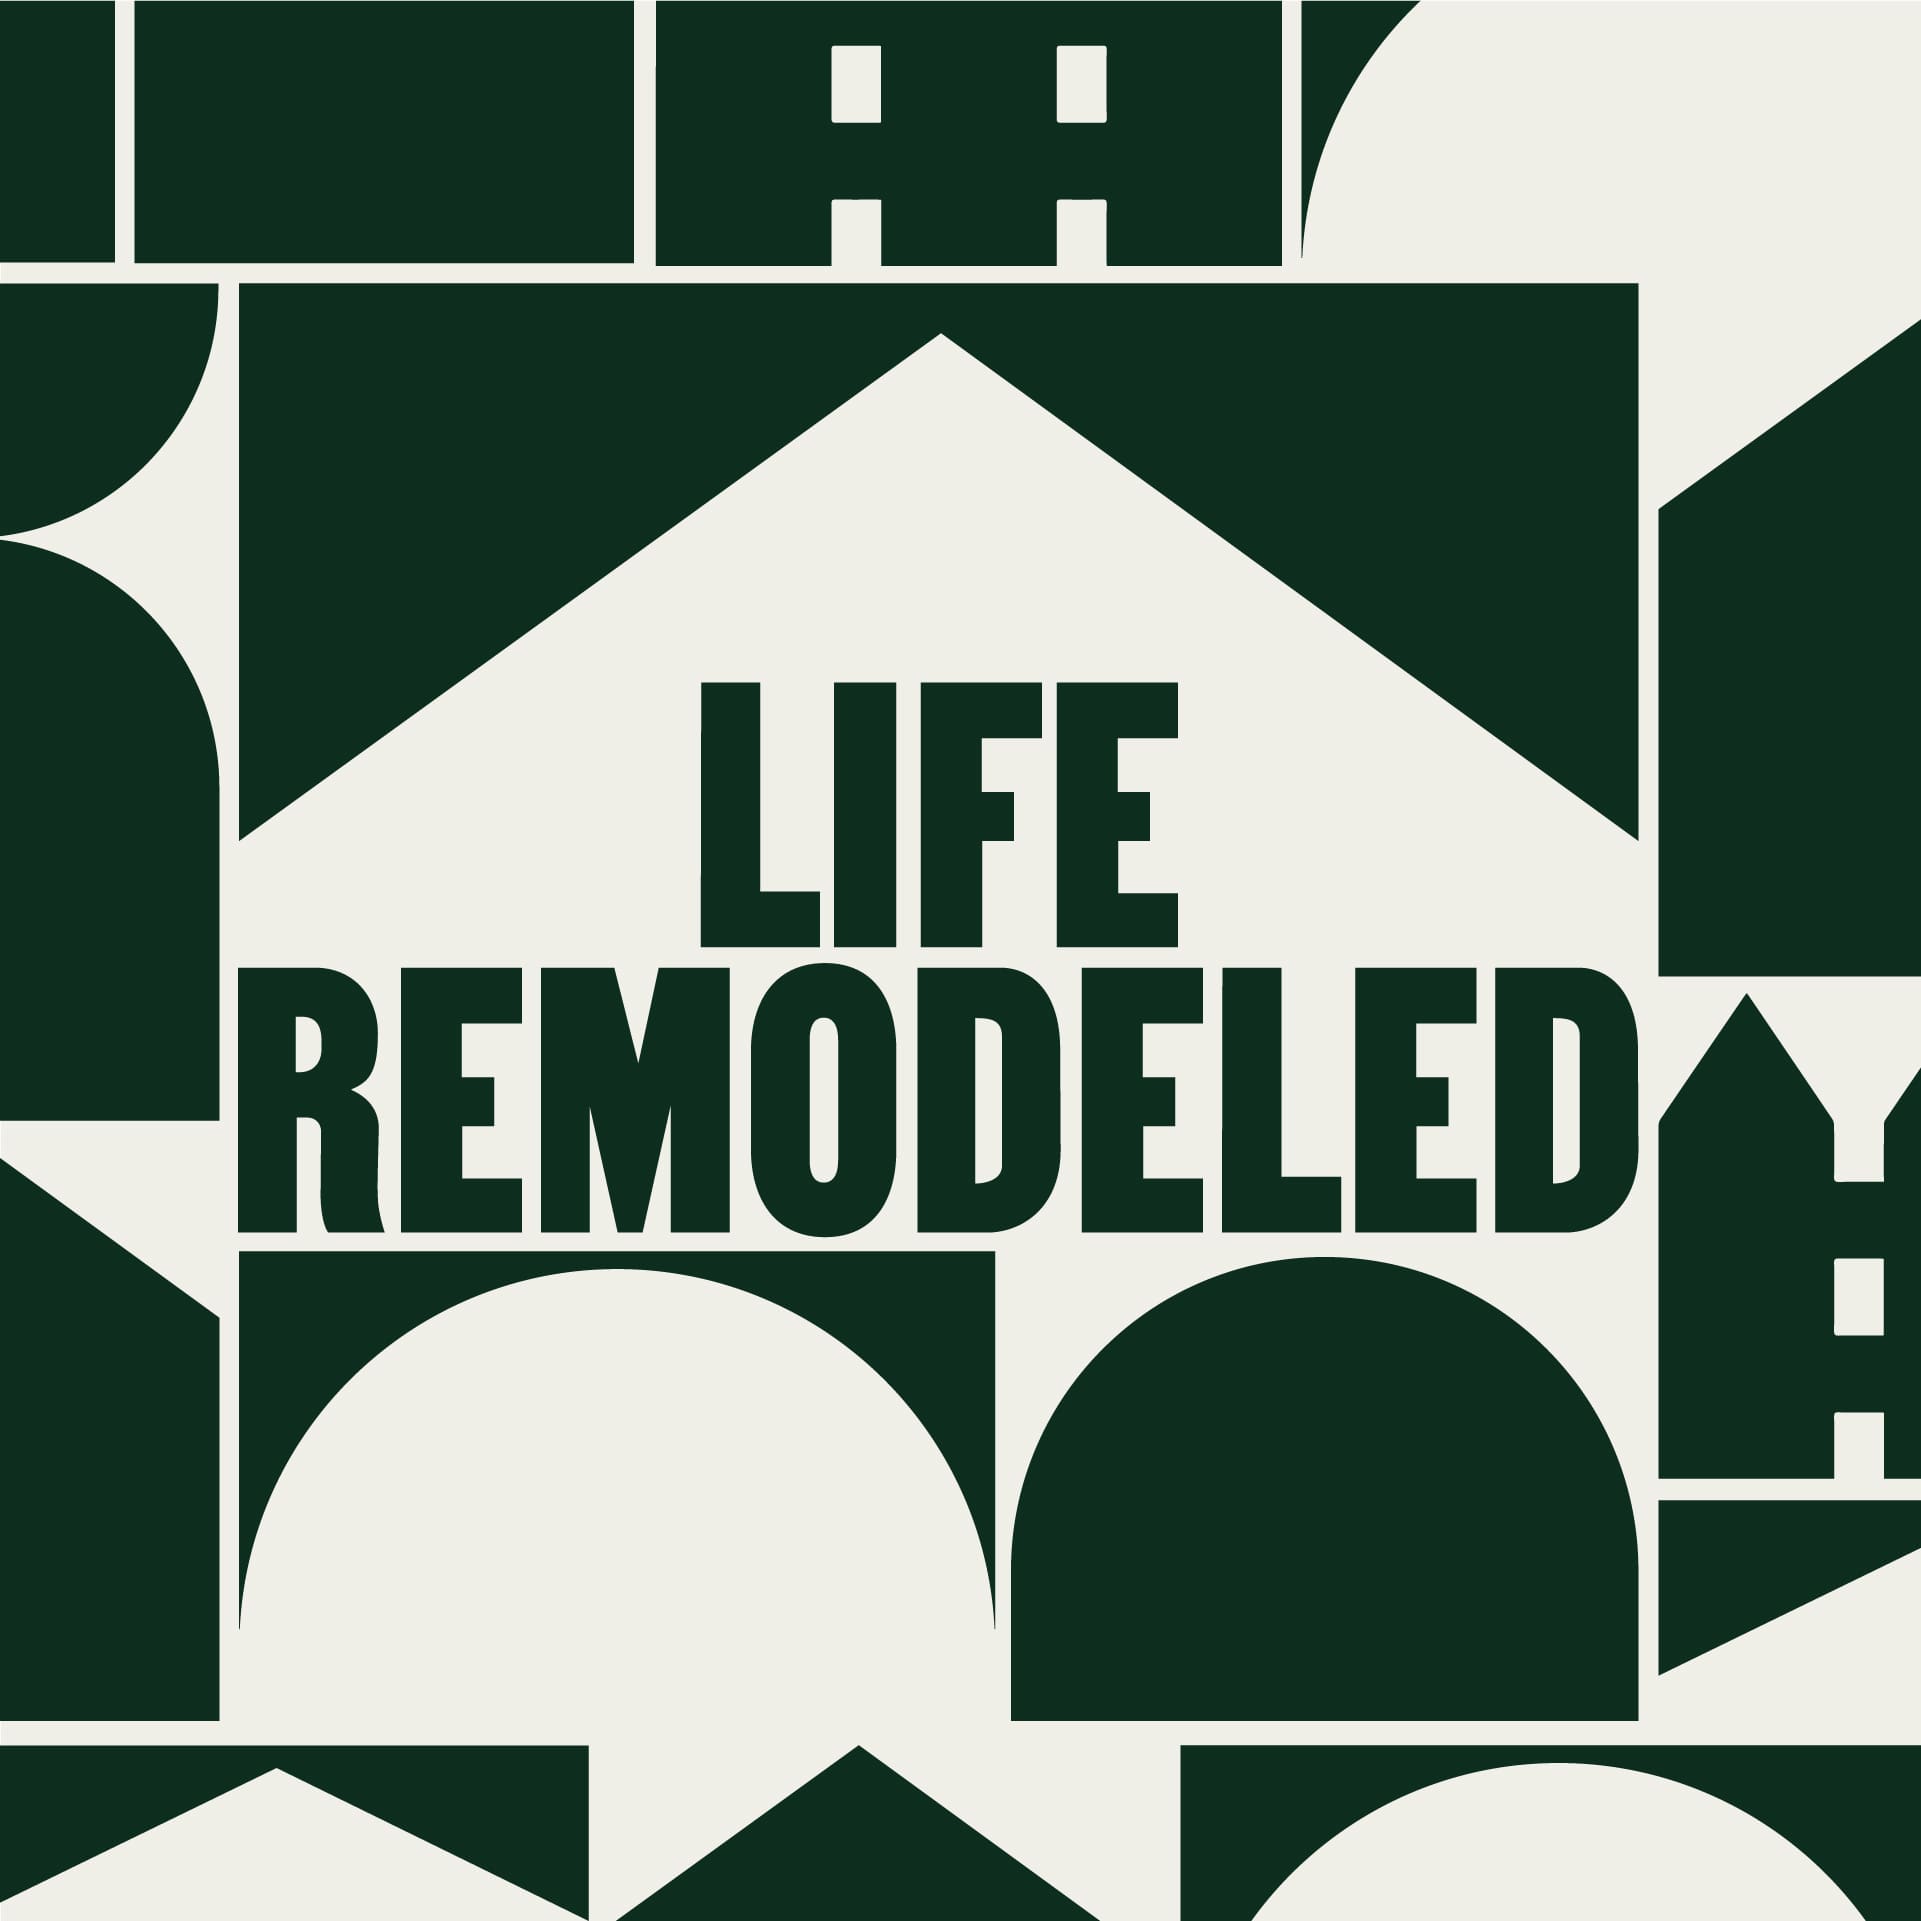 Bold black text that reads "Life Remodeled" against a white background. The text is surrounded by black geometric shapes that resemble housing units. Part of a branding system.